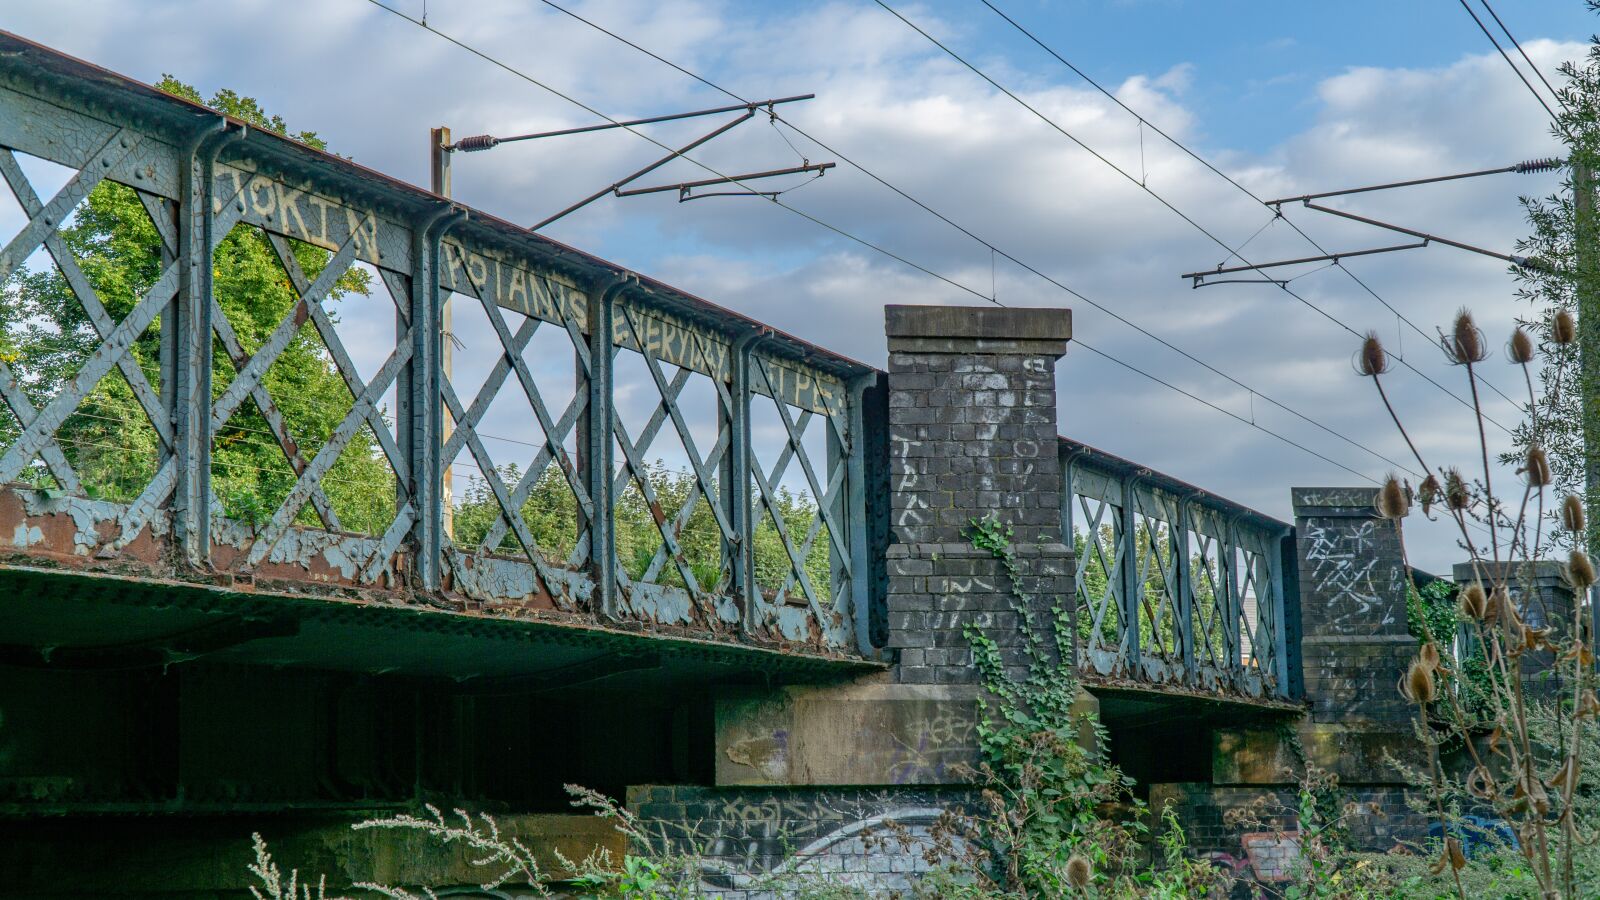 Sony a6000 sample photo. Traction, bridge, the viaduct photography